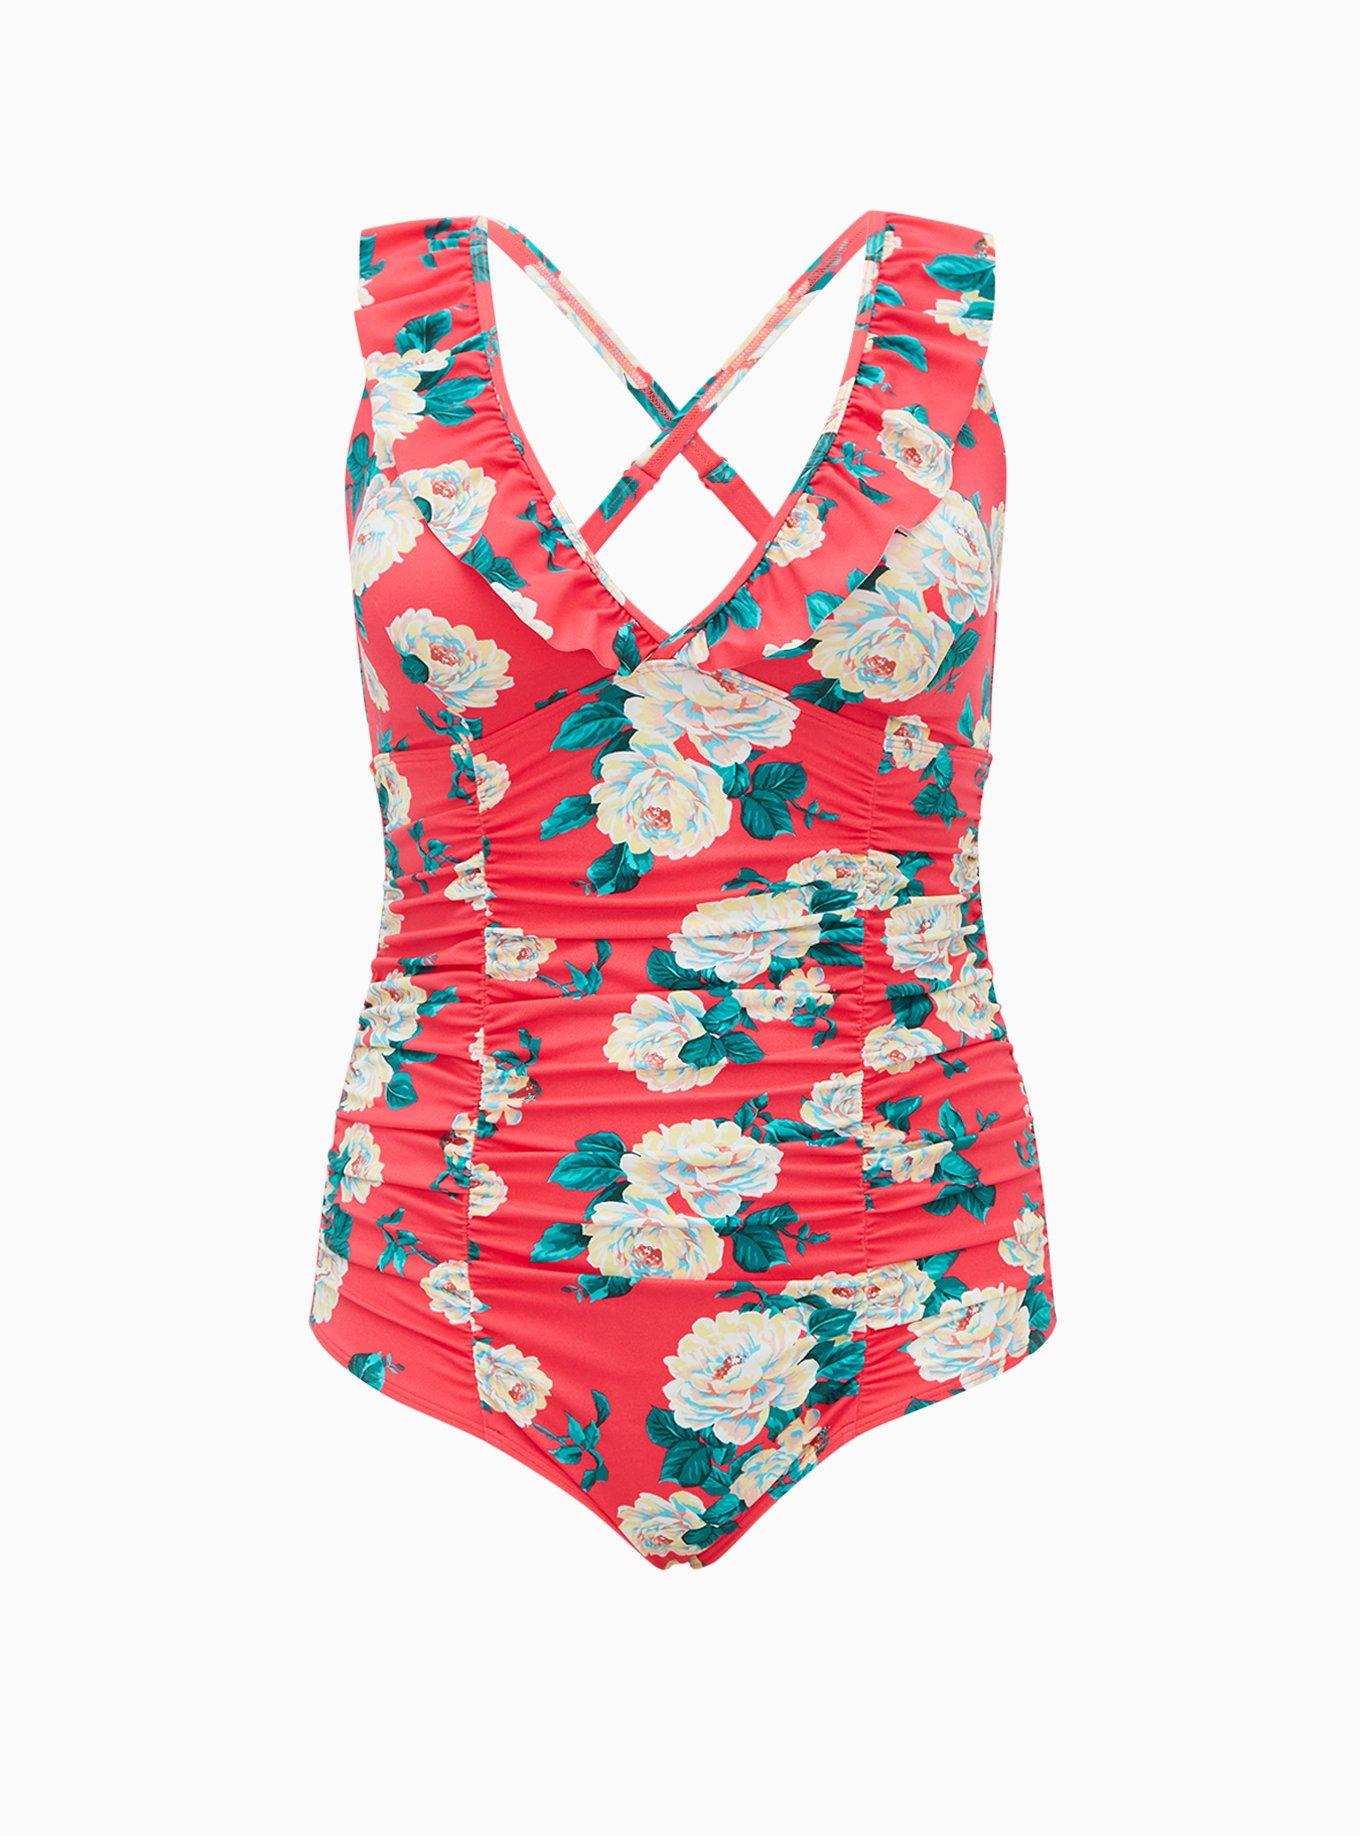 Plus Size - Coral Floral Wireless Ruffle One-Piece Swimsuit - Torrid